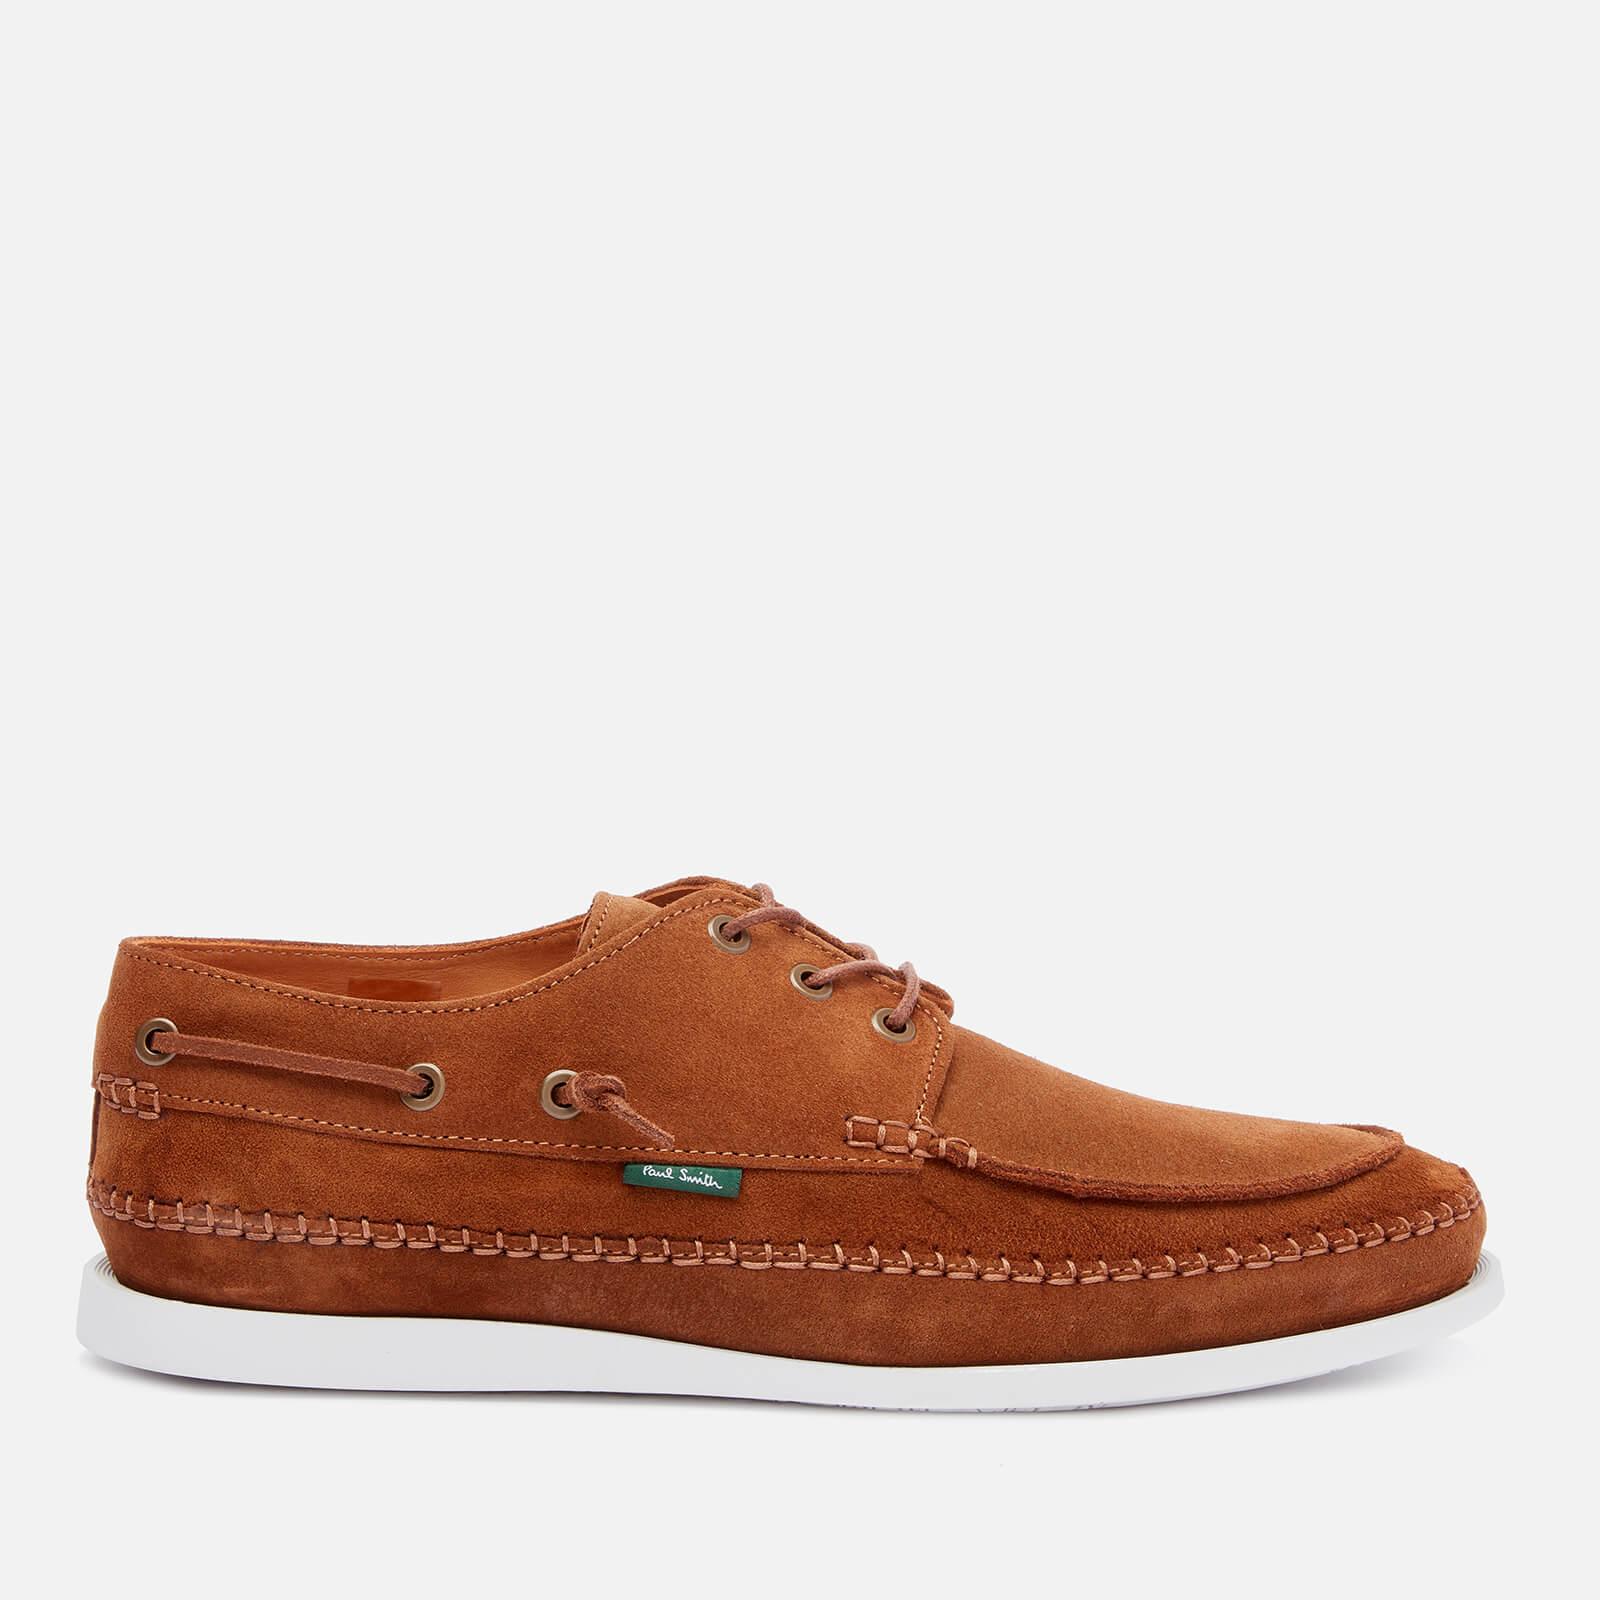 PS by Paul Smith Hobbs Suede Boat Shoes in Tan (Brown) for Men - Lyst